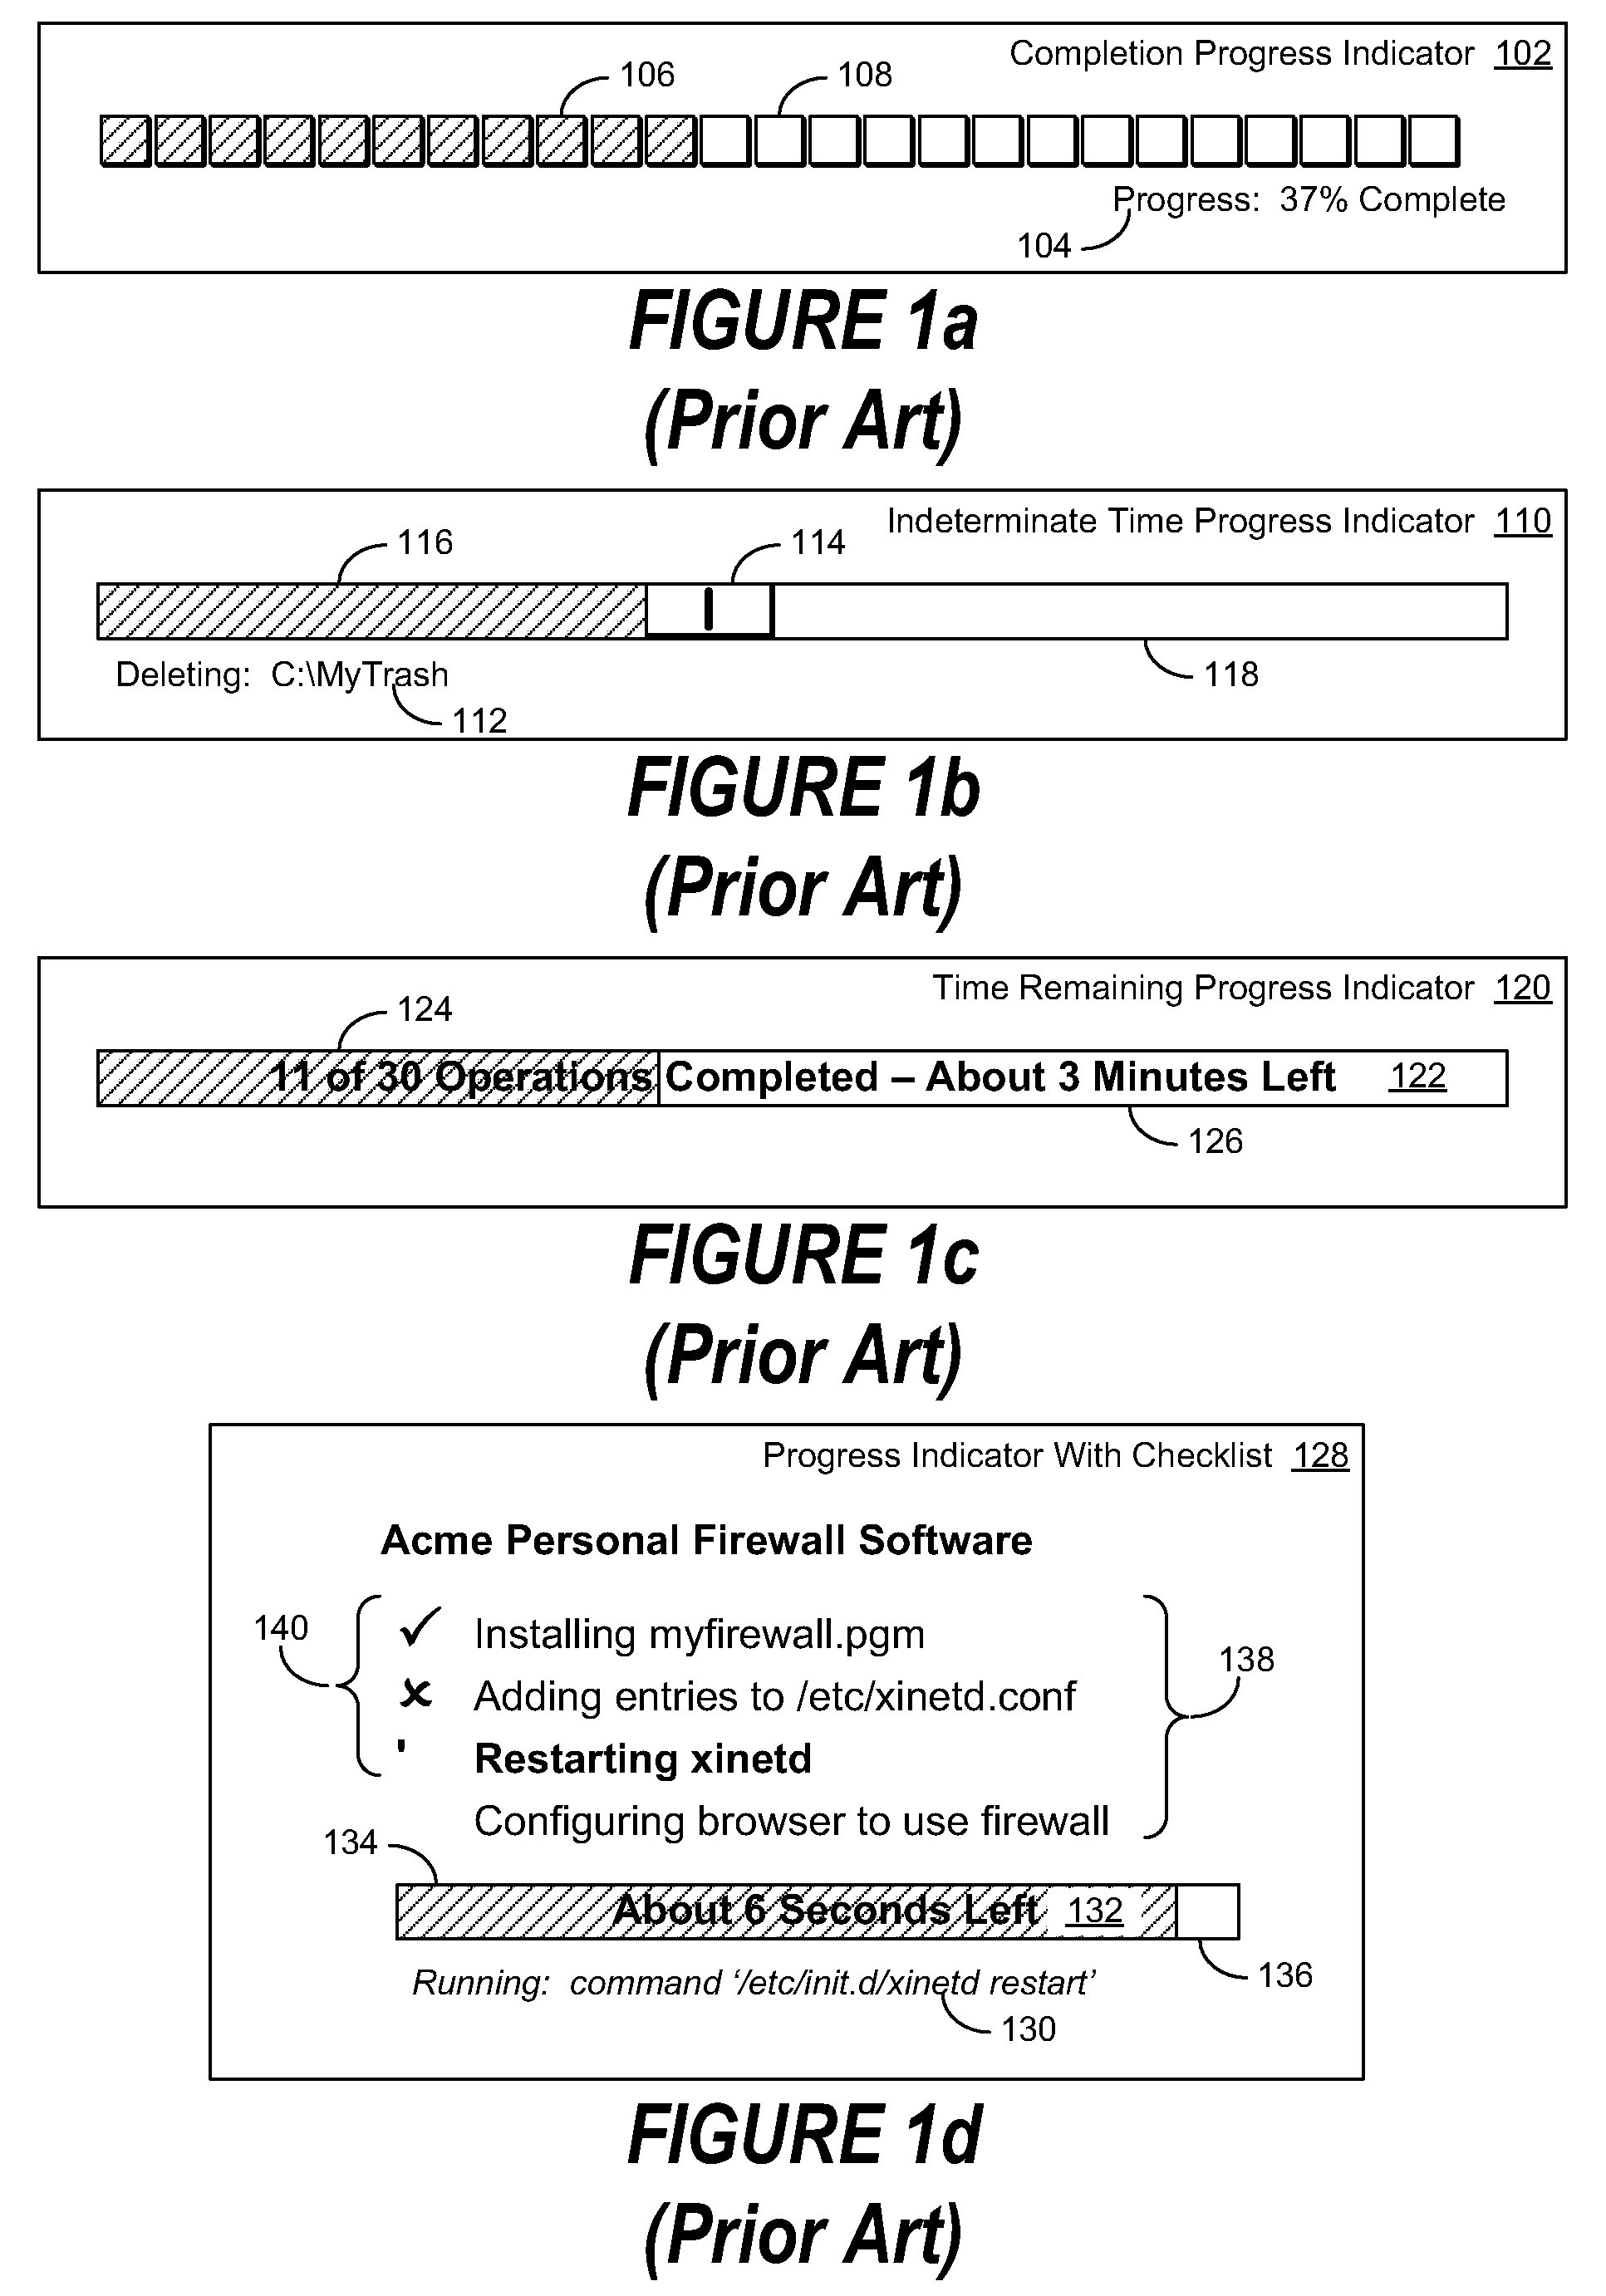 System and Method to Shuffle Steps Via an Interactive Progress Bar